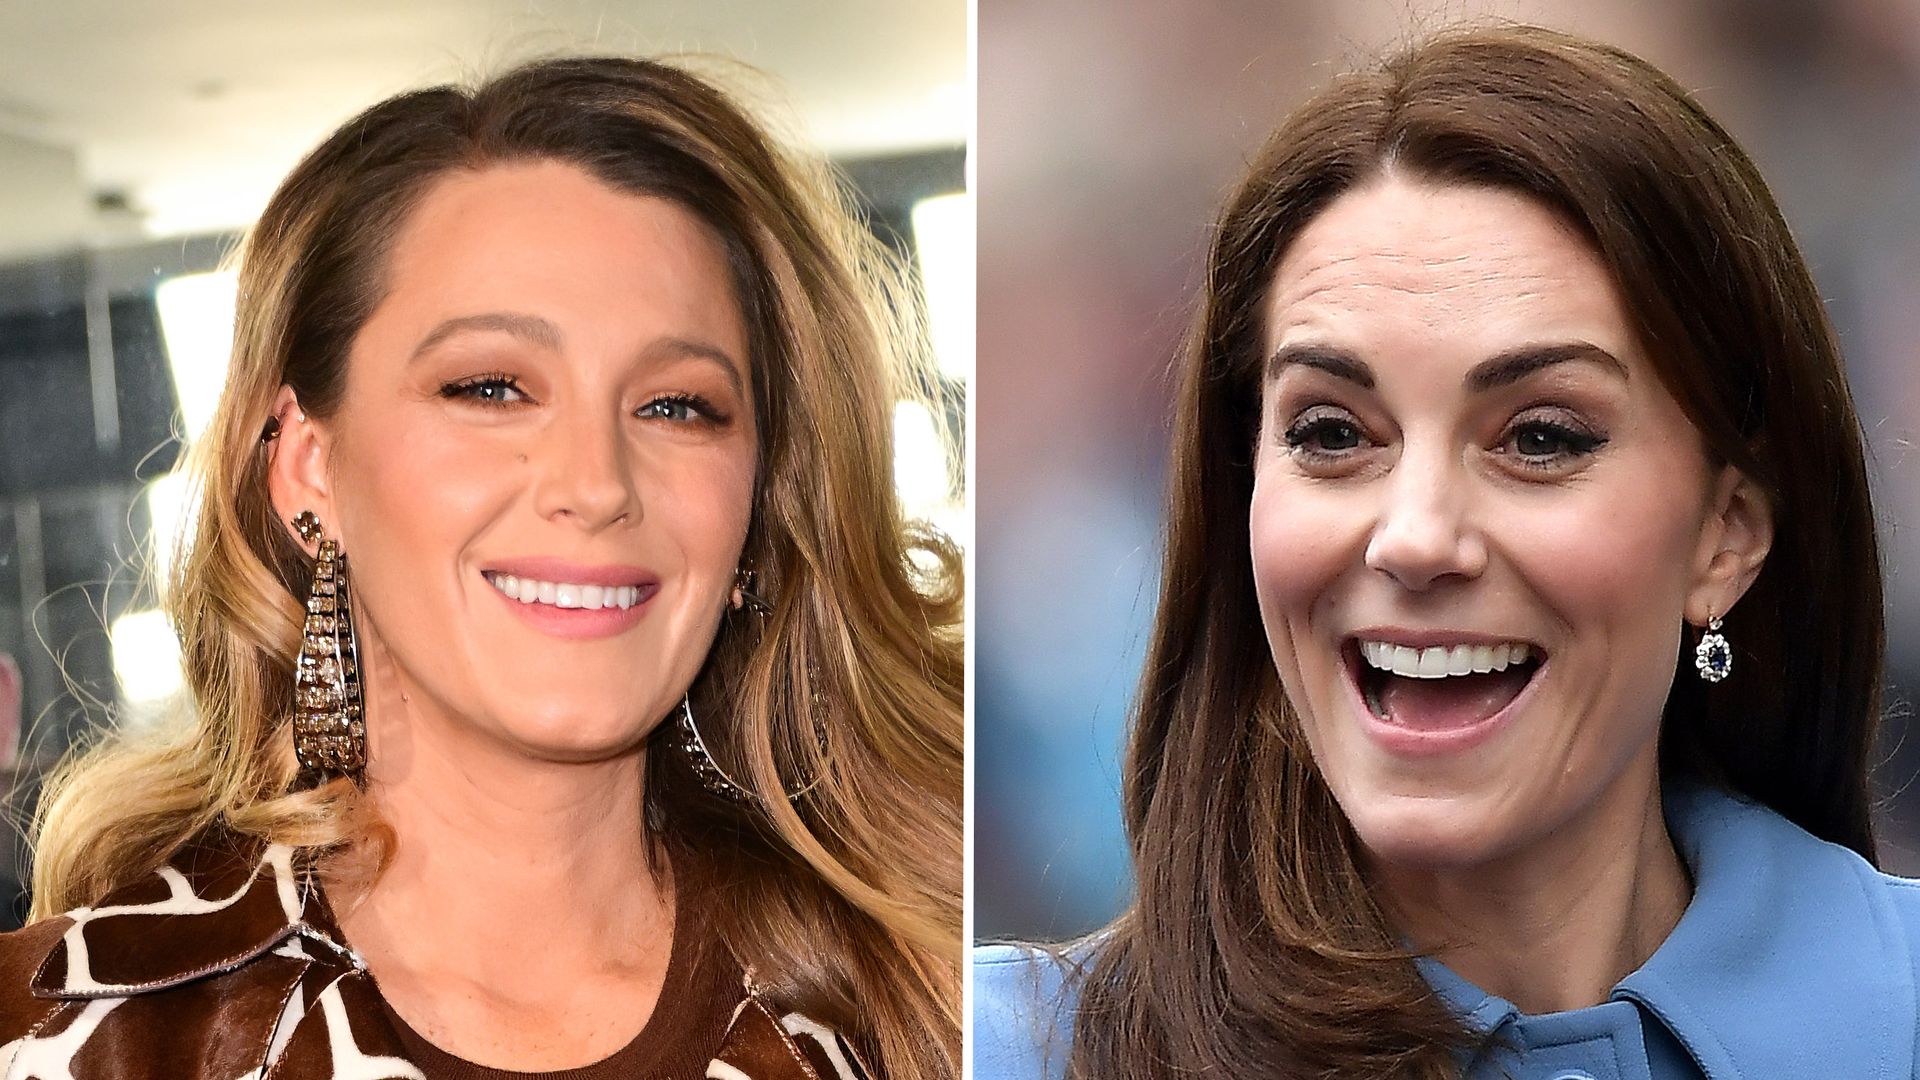 Blake Lively jokes about Princess Kate's photoshop controversy for new commercial